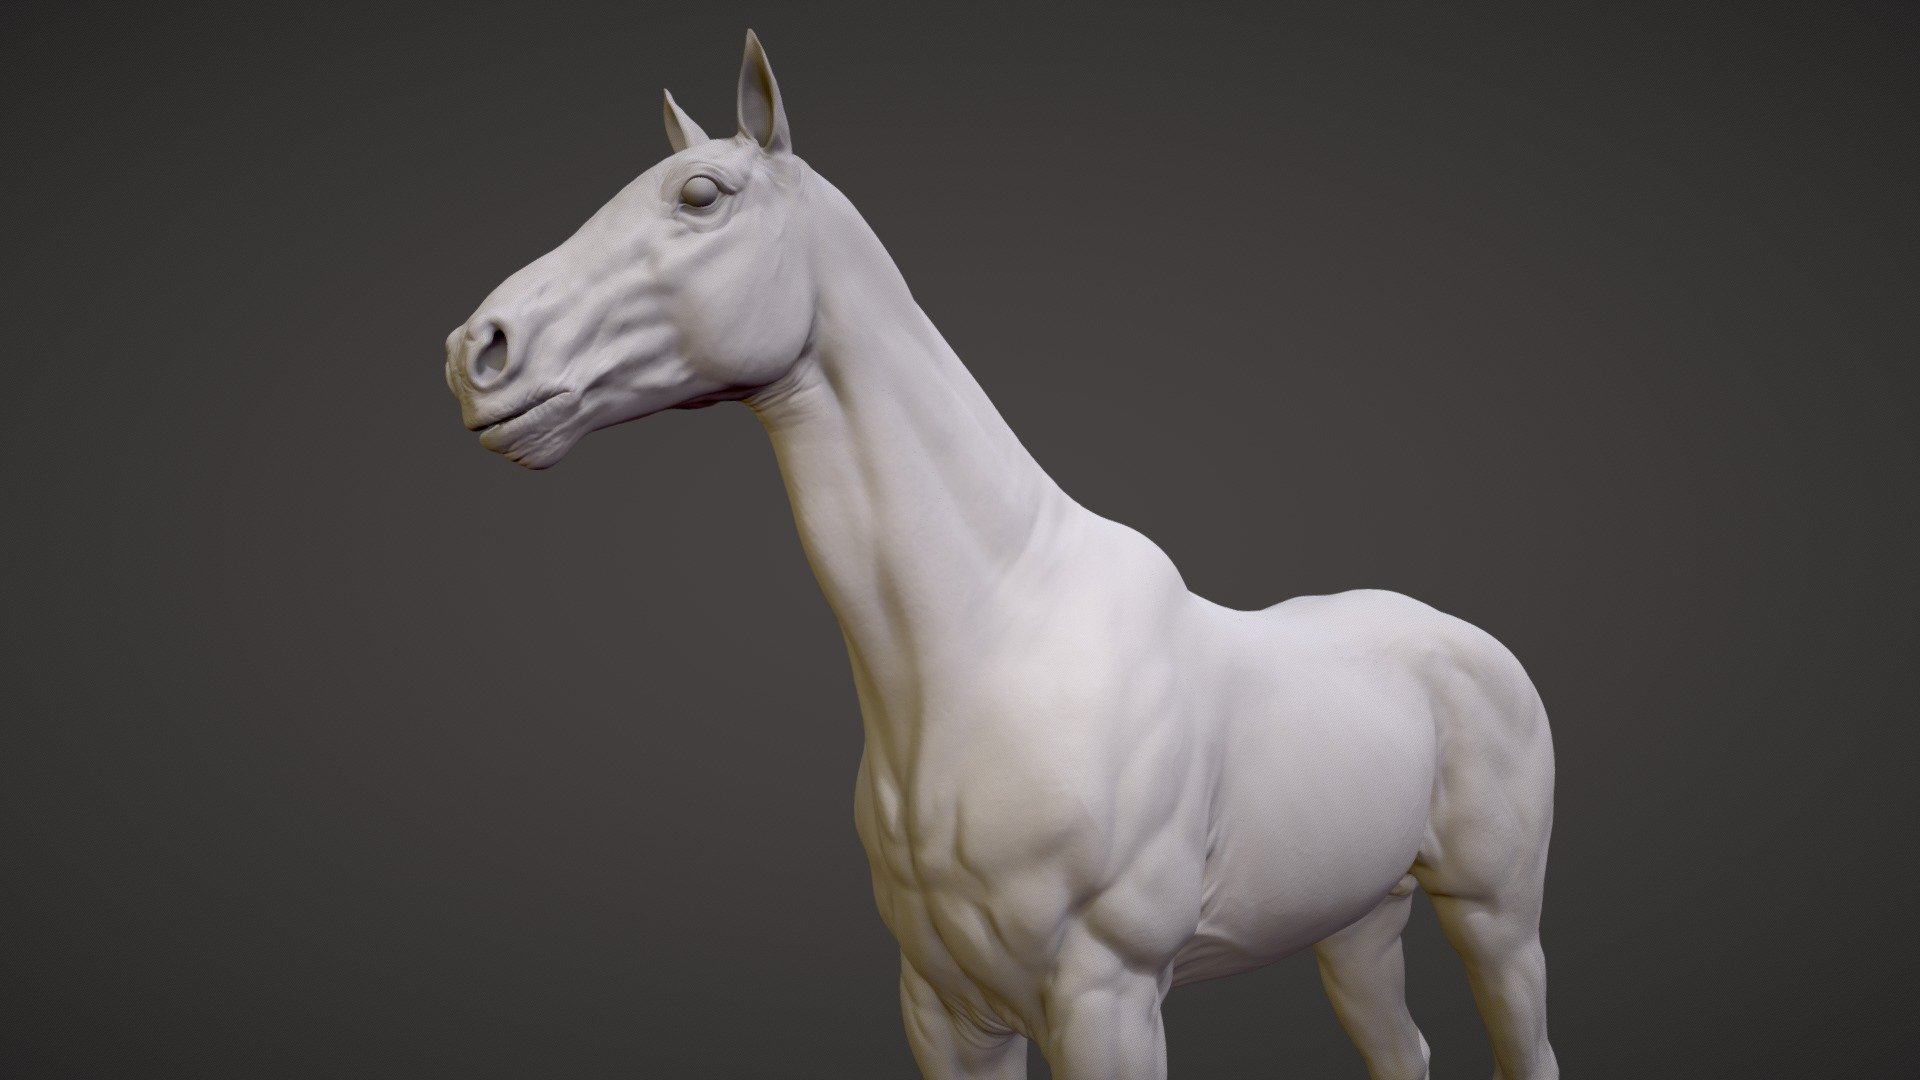 Realistic Horse 3D model, high resolution. Model has clean topology, contains only quads.

Zbrush ZTL/ZPR  files( Zbrush 2018.1) included with multiple subdivision levels.  Also included decimated (5 and 1.2 milions points)  OBJ, and FBX files.


Files: Zbrush(2018.1), FBX, STL, OBJ

Number of characters: 1

Number of Subtools: 4(Body, Jaw, Tongue, Eyes)


Polypaint: No

Textures: No


SubDivs: 7(Body)

UV mapping: No

Poly-count:

Total: 28.846.000

Minimum vertices count: 5.375(Body)

Maximum vertices count: 21.937.000(Body)

Decimated model: 1.127.245
 - Realistic Horse Sculpt - Buy Royalty Free 3D model by Viverna (@Viverna_362) 3d model